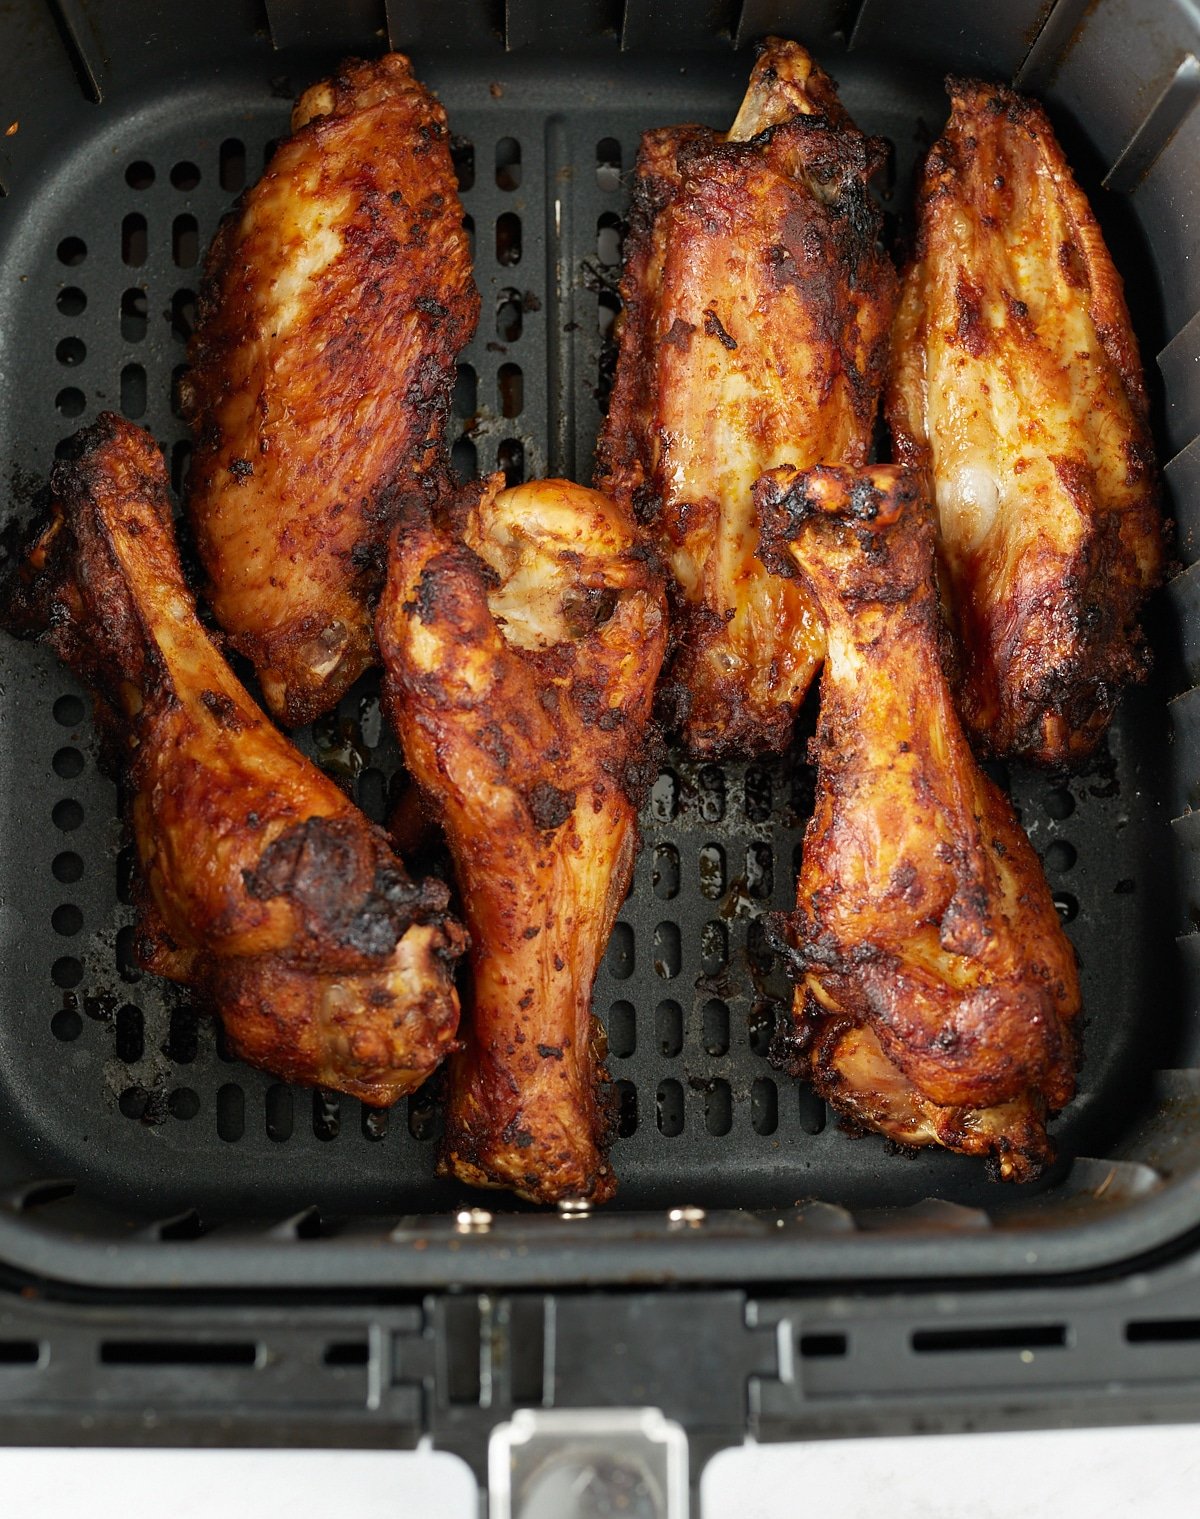 The wings in the air fryer basket after being cooked.